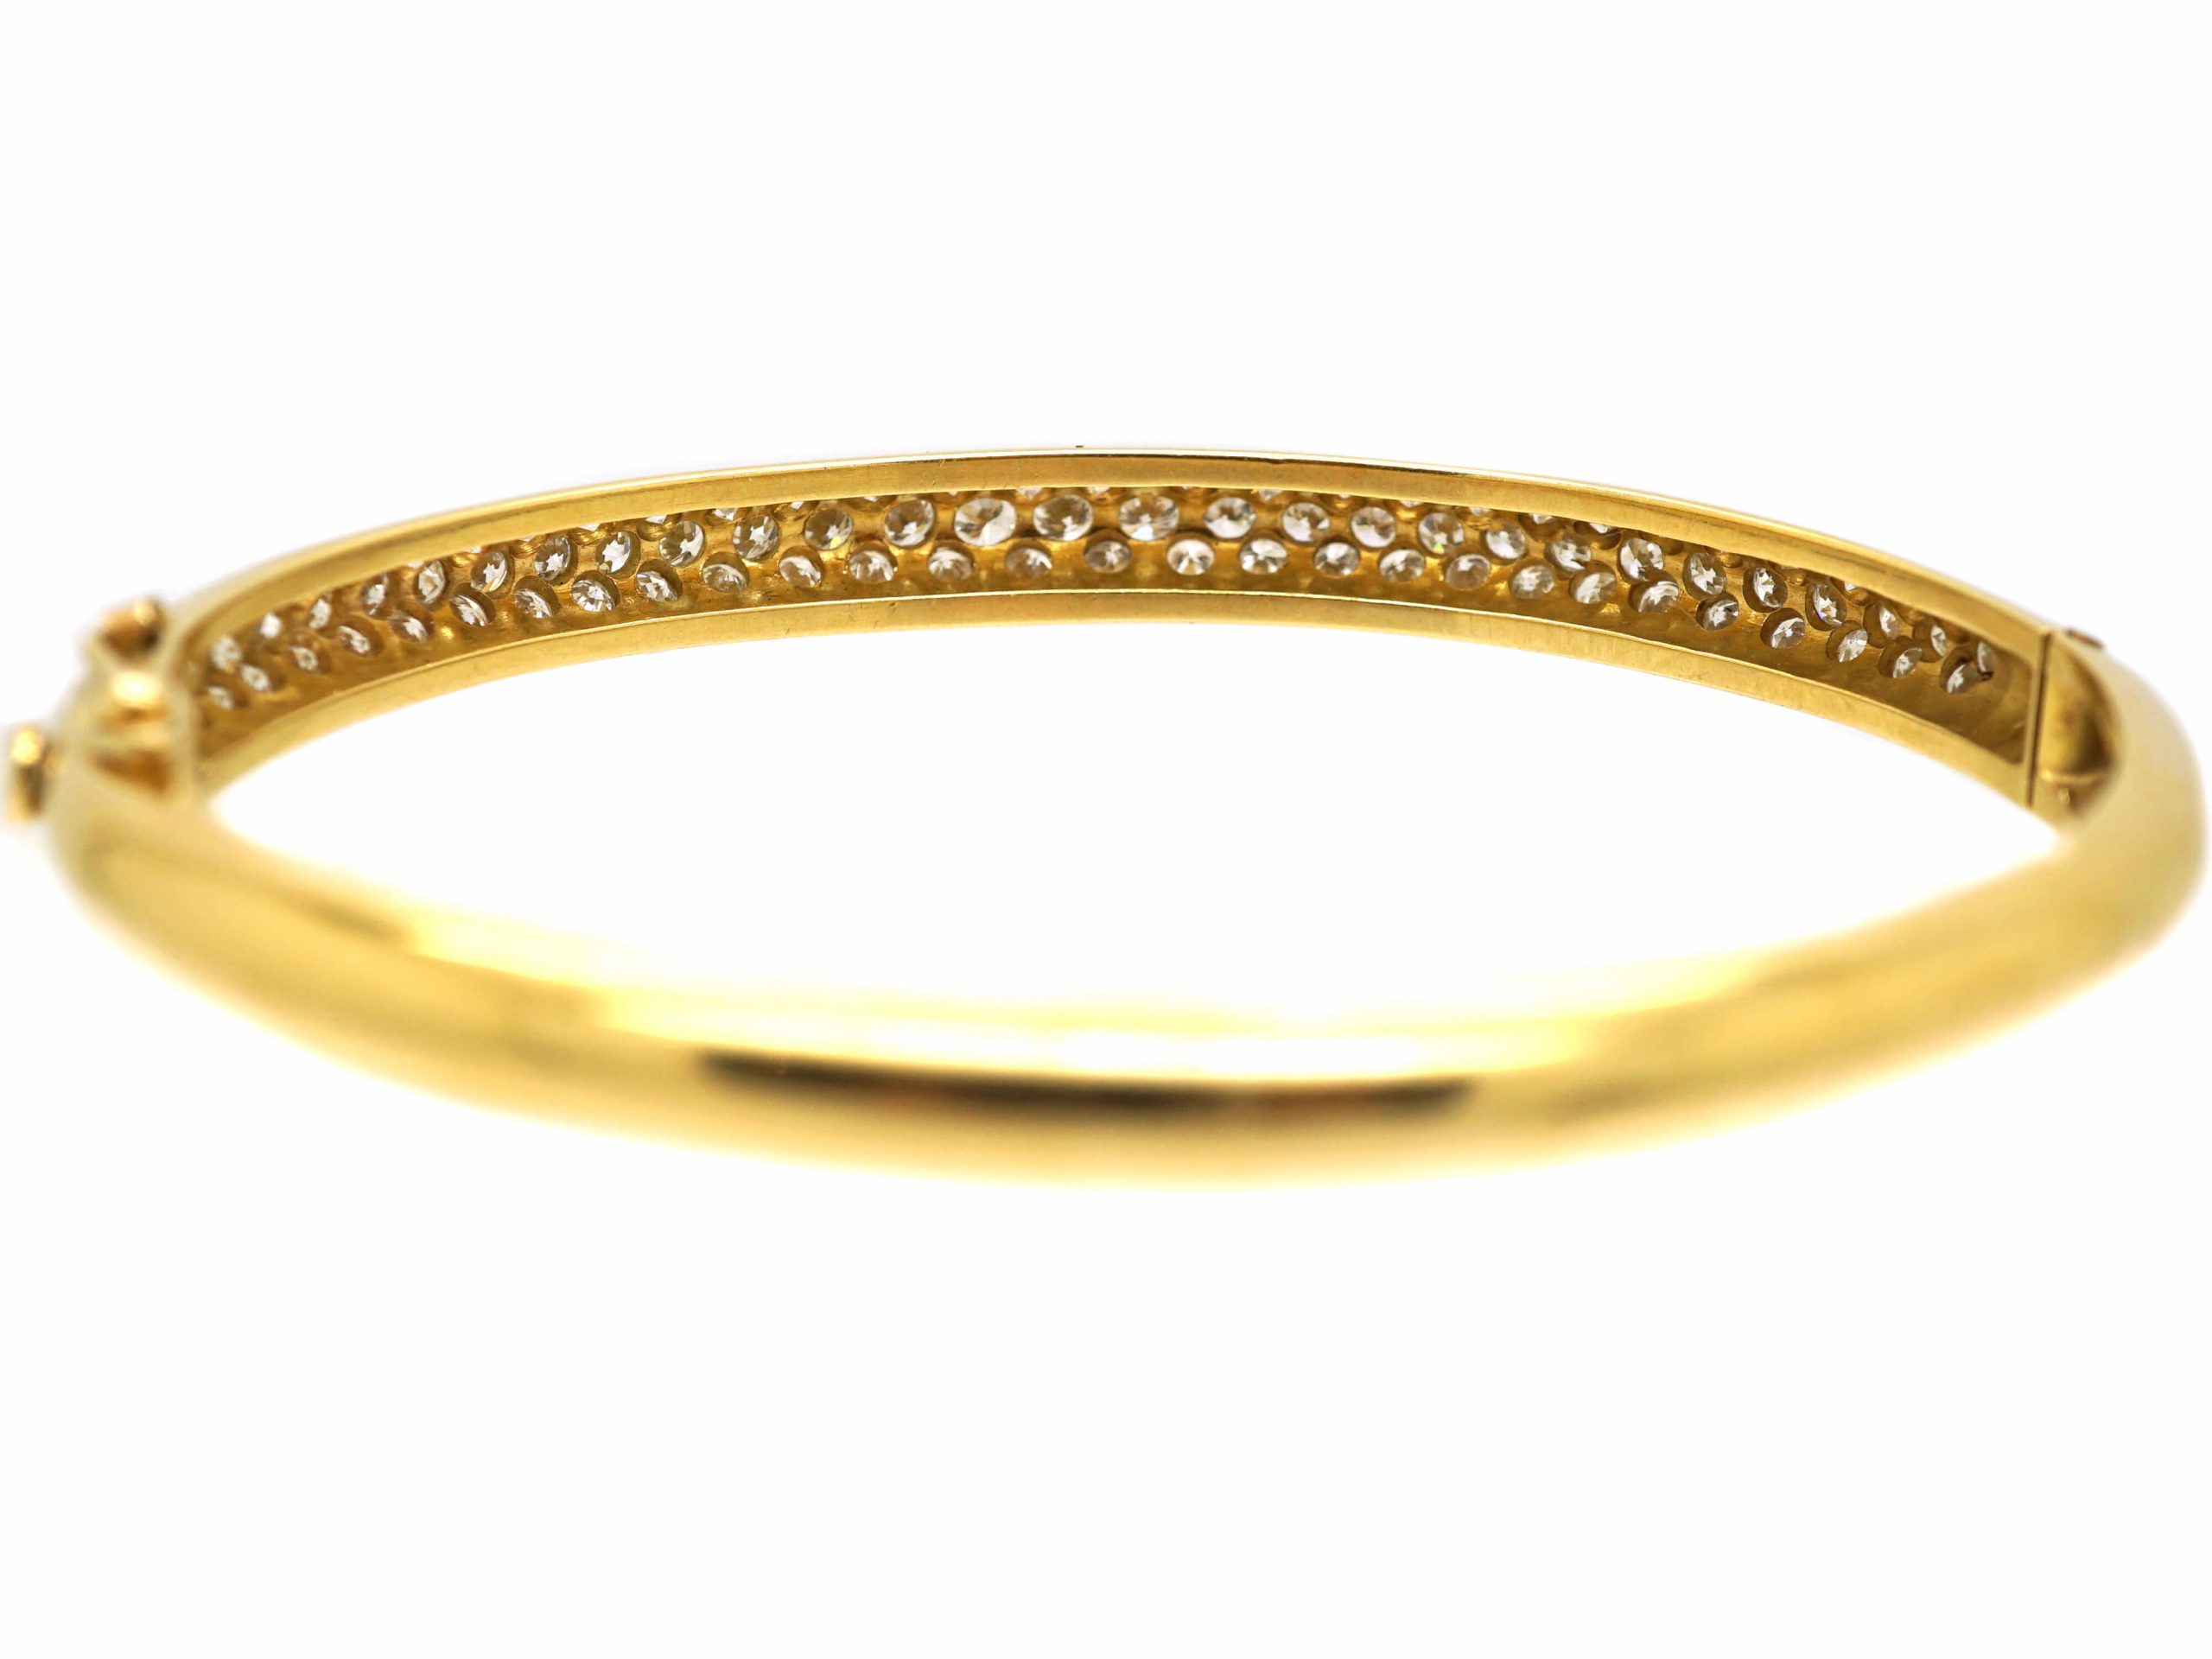 French 18ct Gold & Diamond Bangle (120W) | The Antique Jewellery Company